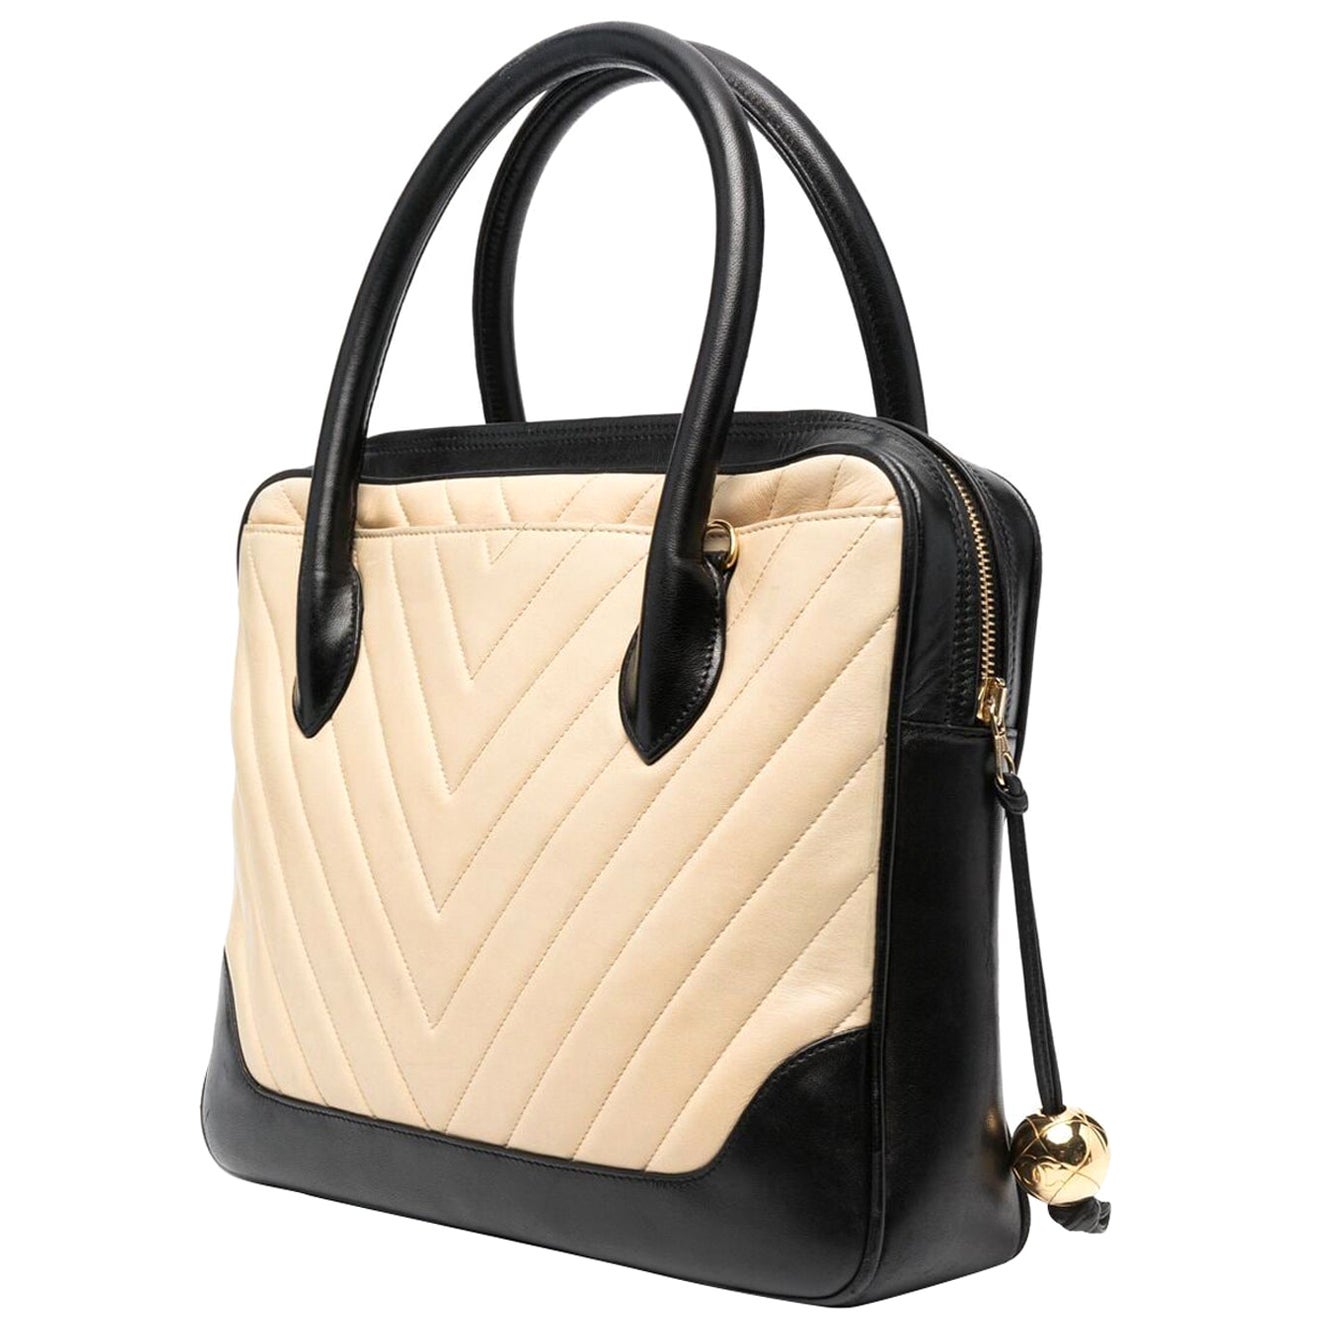 Chanel Quilted Leather Tote Bag